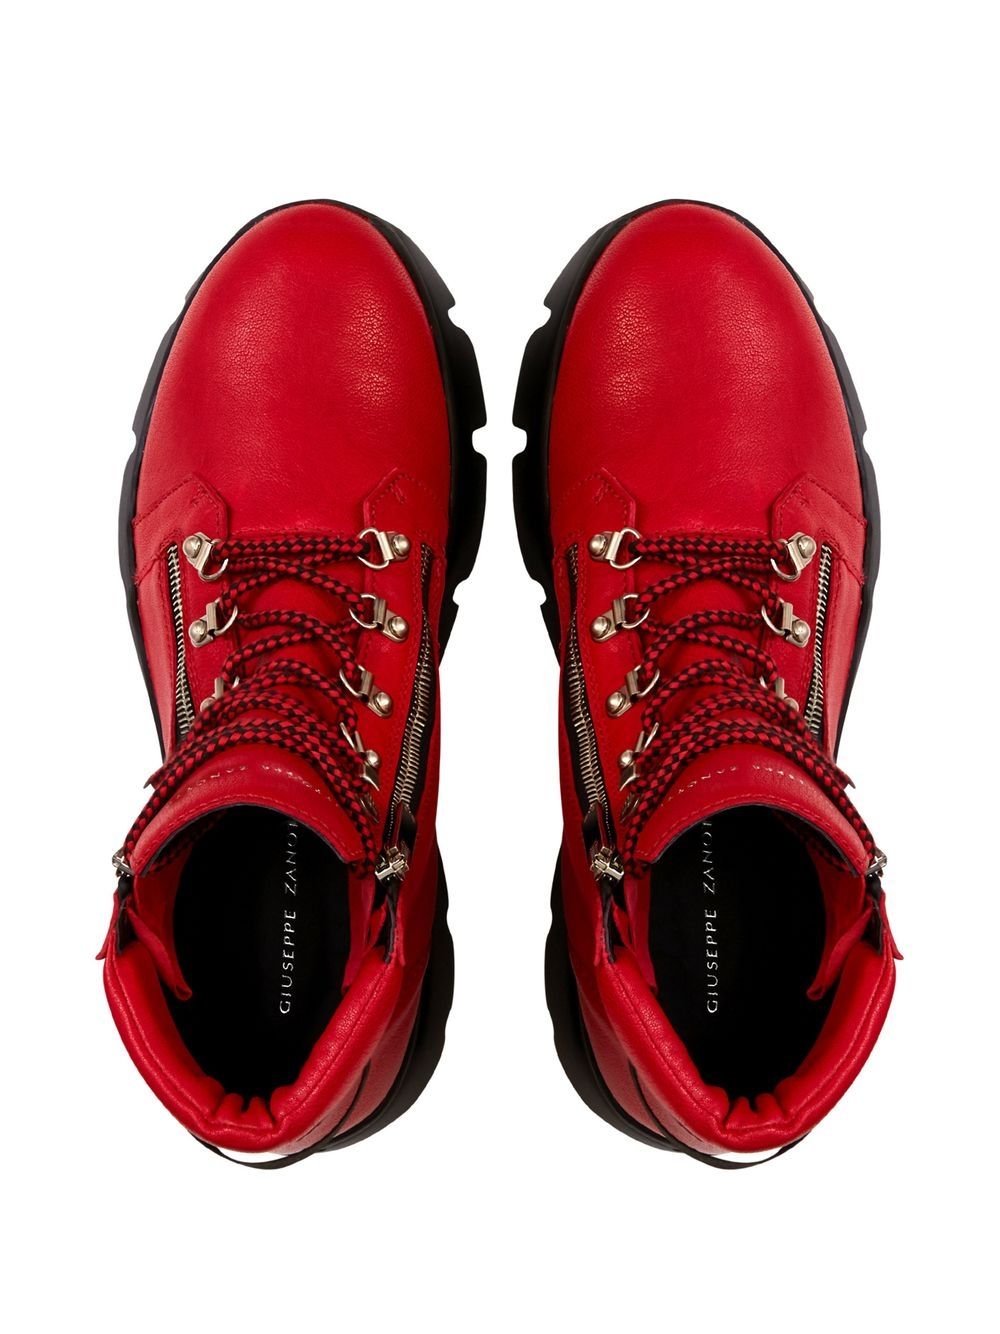 Shop Giuseppe Zanotti Apocalypse Trek Leather Ankle Boots In Red